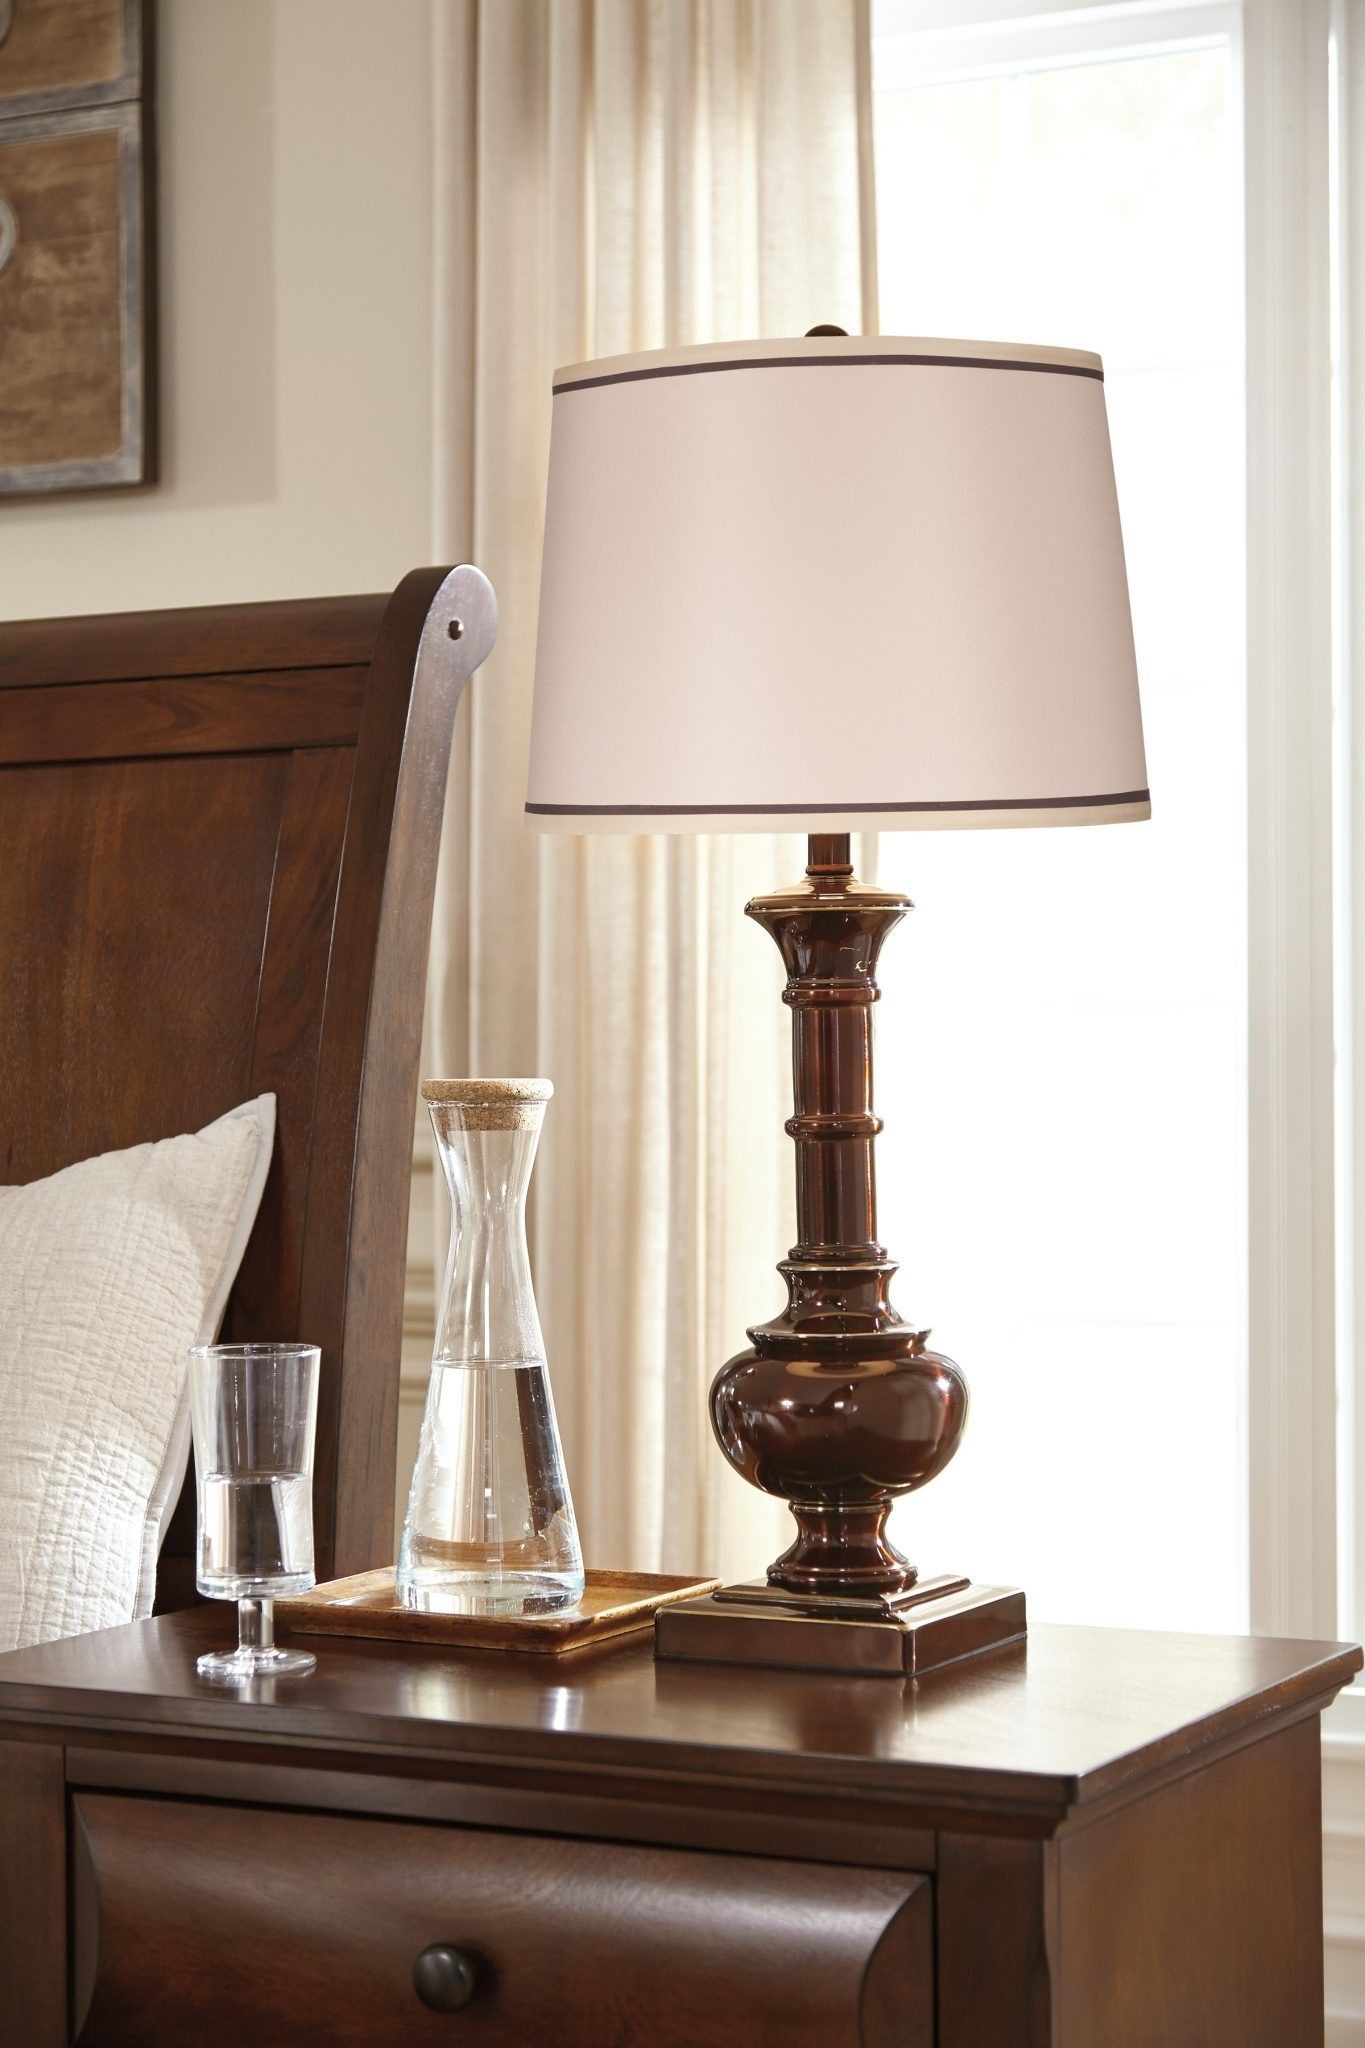 Top 65 Superb Elegant Table Lamps Modern For Living Room Traditional With Regard To Living Room Table Top Lamps (View 3 of 15)